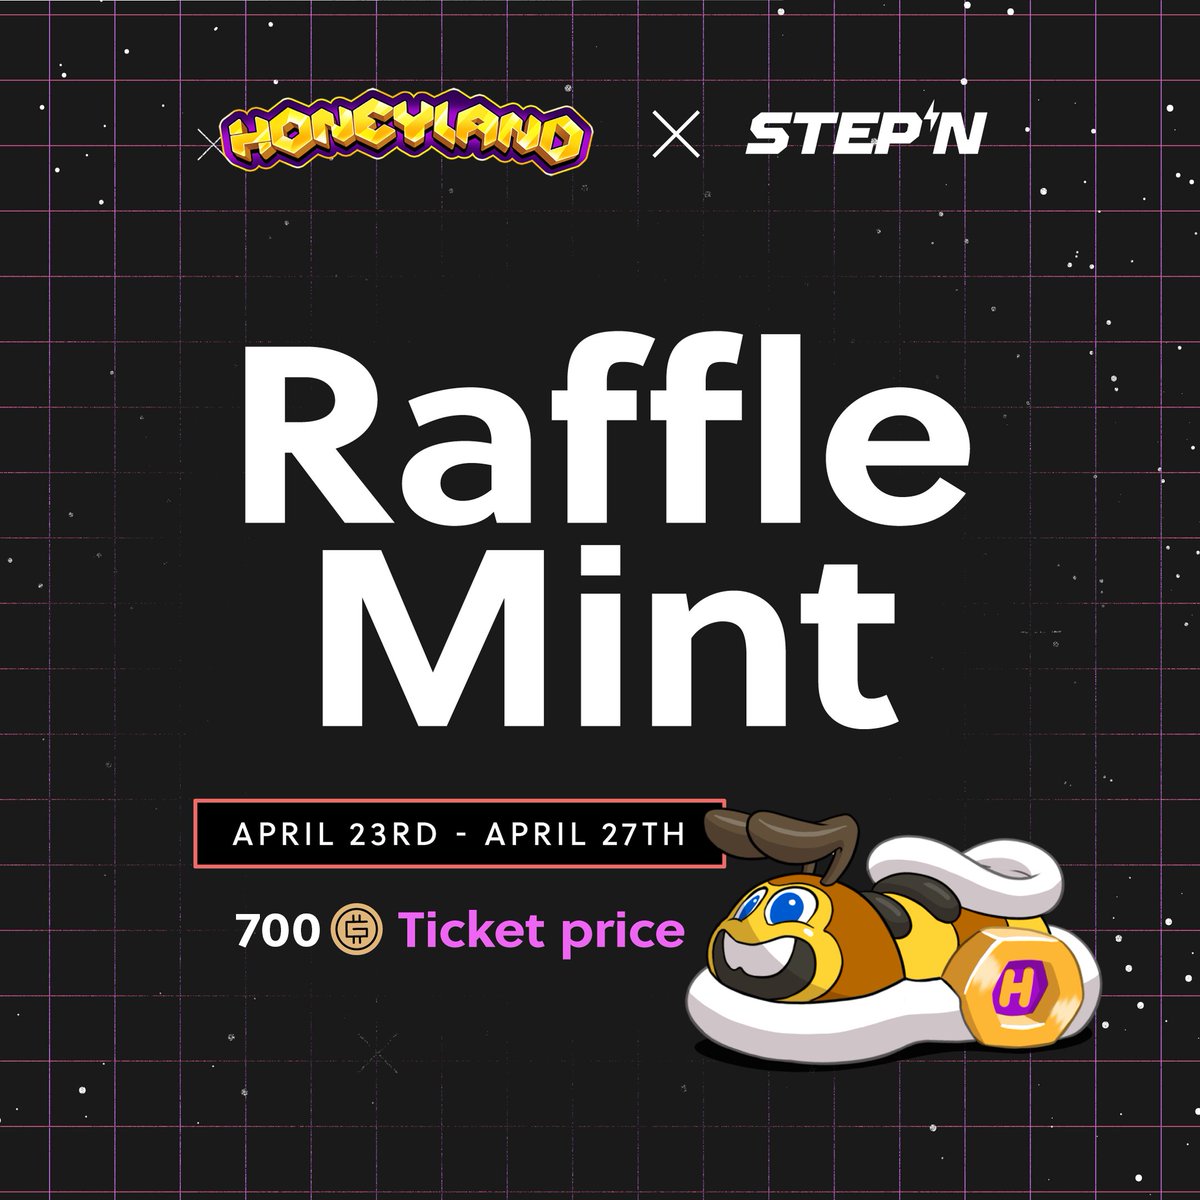 STEPN x @PlayHoneyland 🐝 #Honeyland is a free-to-play strategic game available on Android & iOS, where you can compete in quests & PVP battles to collect honey for your Hive 🕹️ We're starting our partnership with a Raffle Mint featuring 100 co-branded #STEPN x Honeyland…